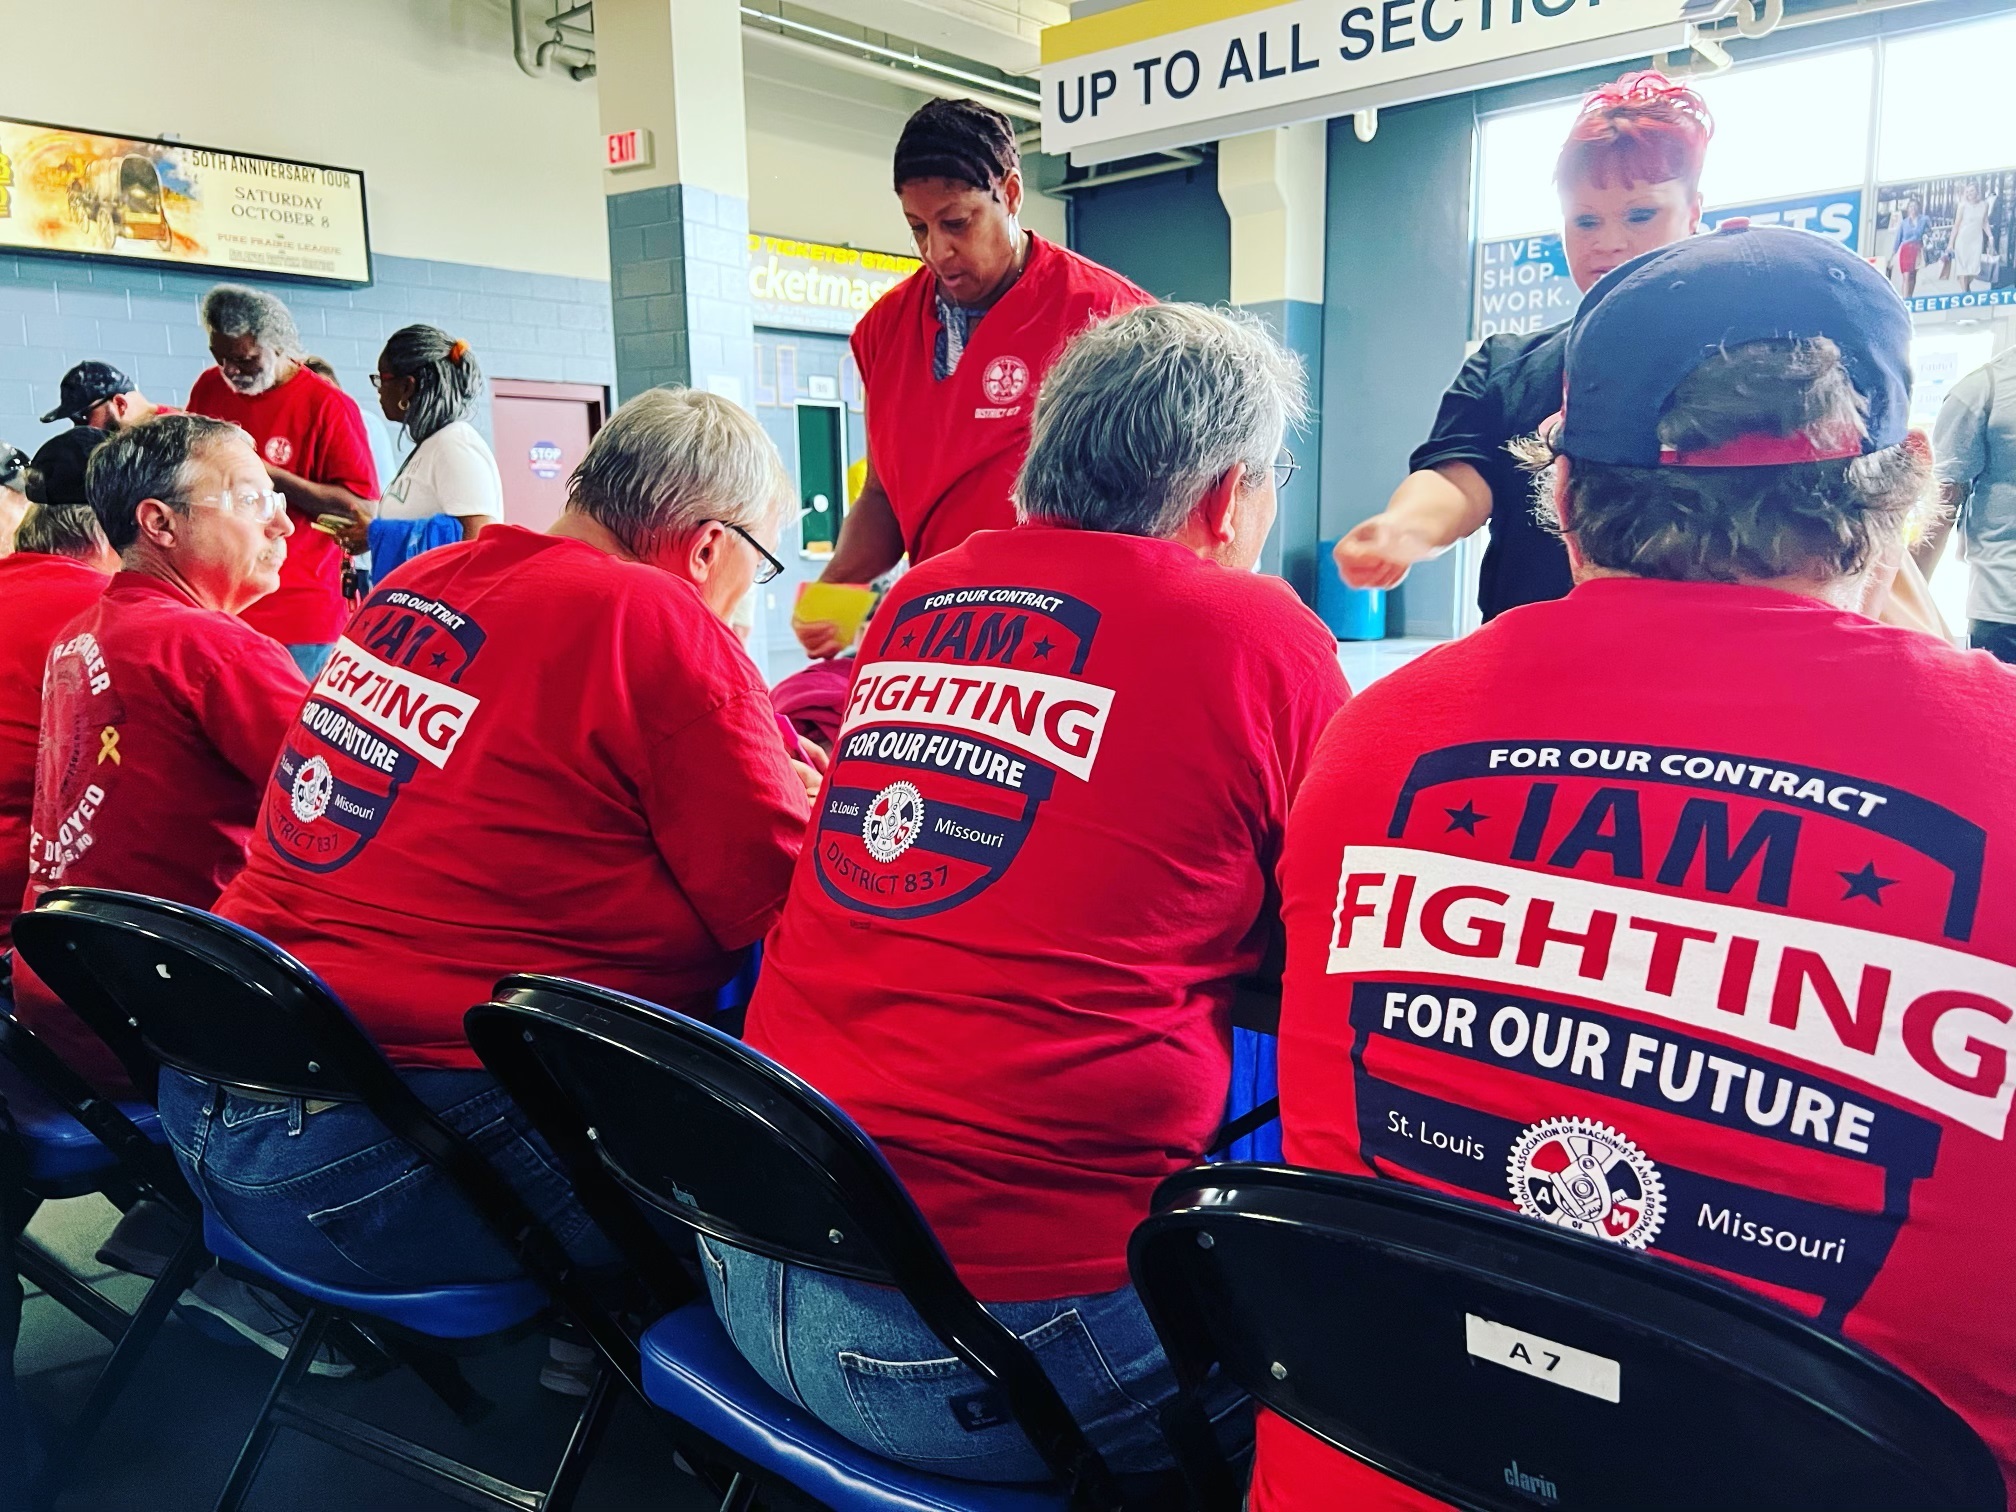 Machinists Union Members at Boeing St. Louis Vote to Ratify Modified Contract After Standing Strong for Secure Retirement Plan, Other Improvements